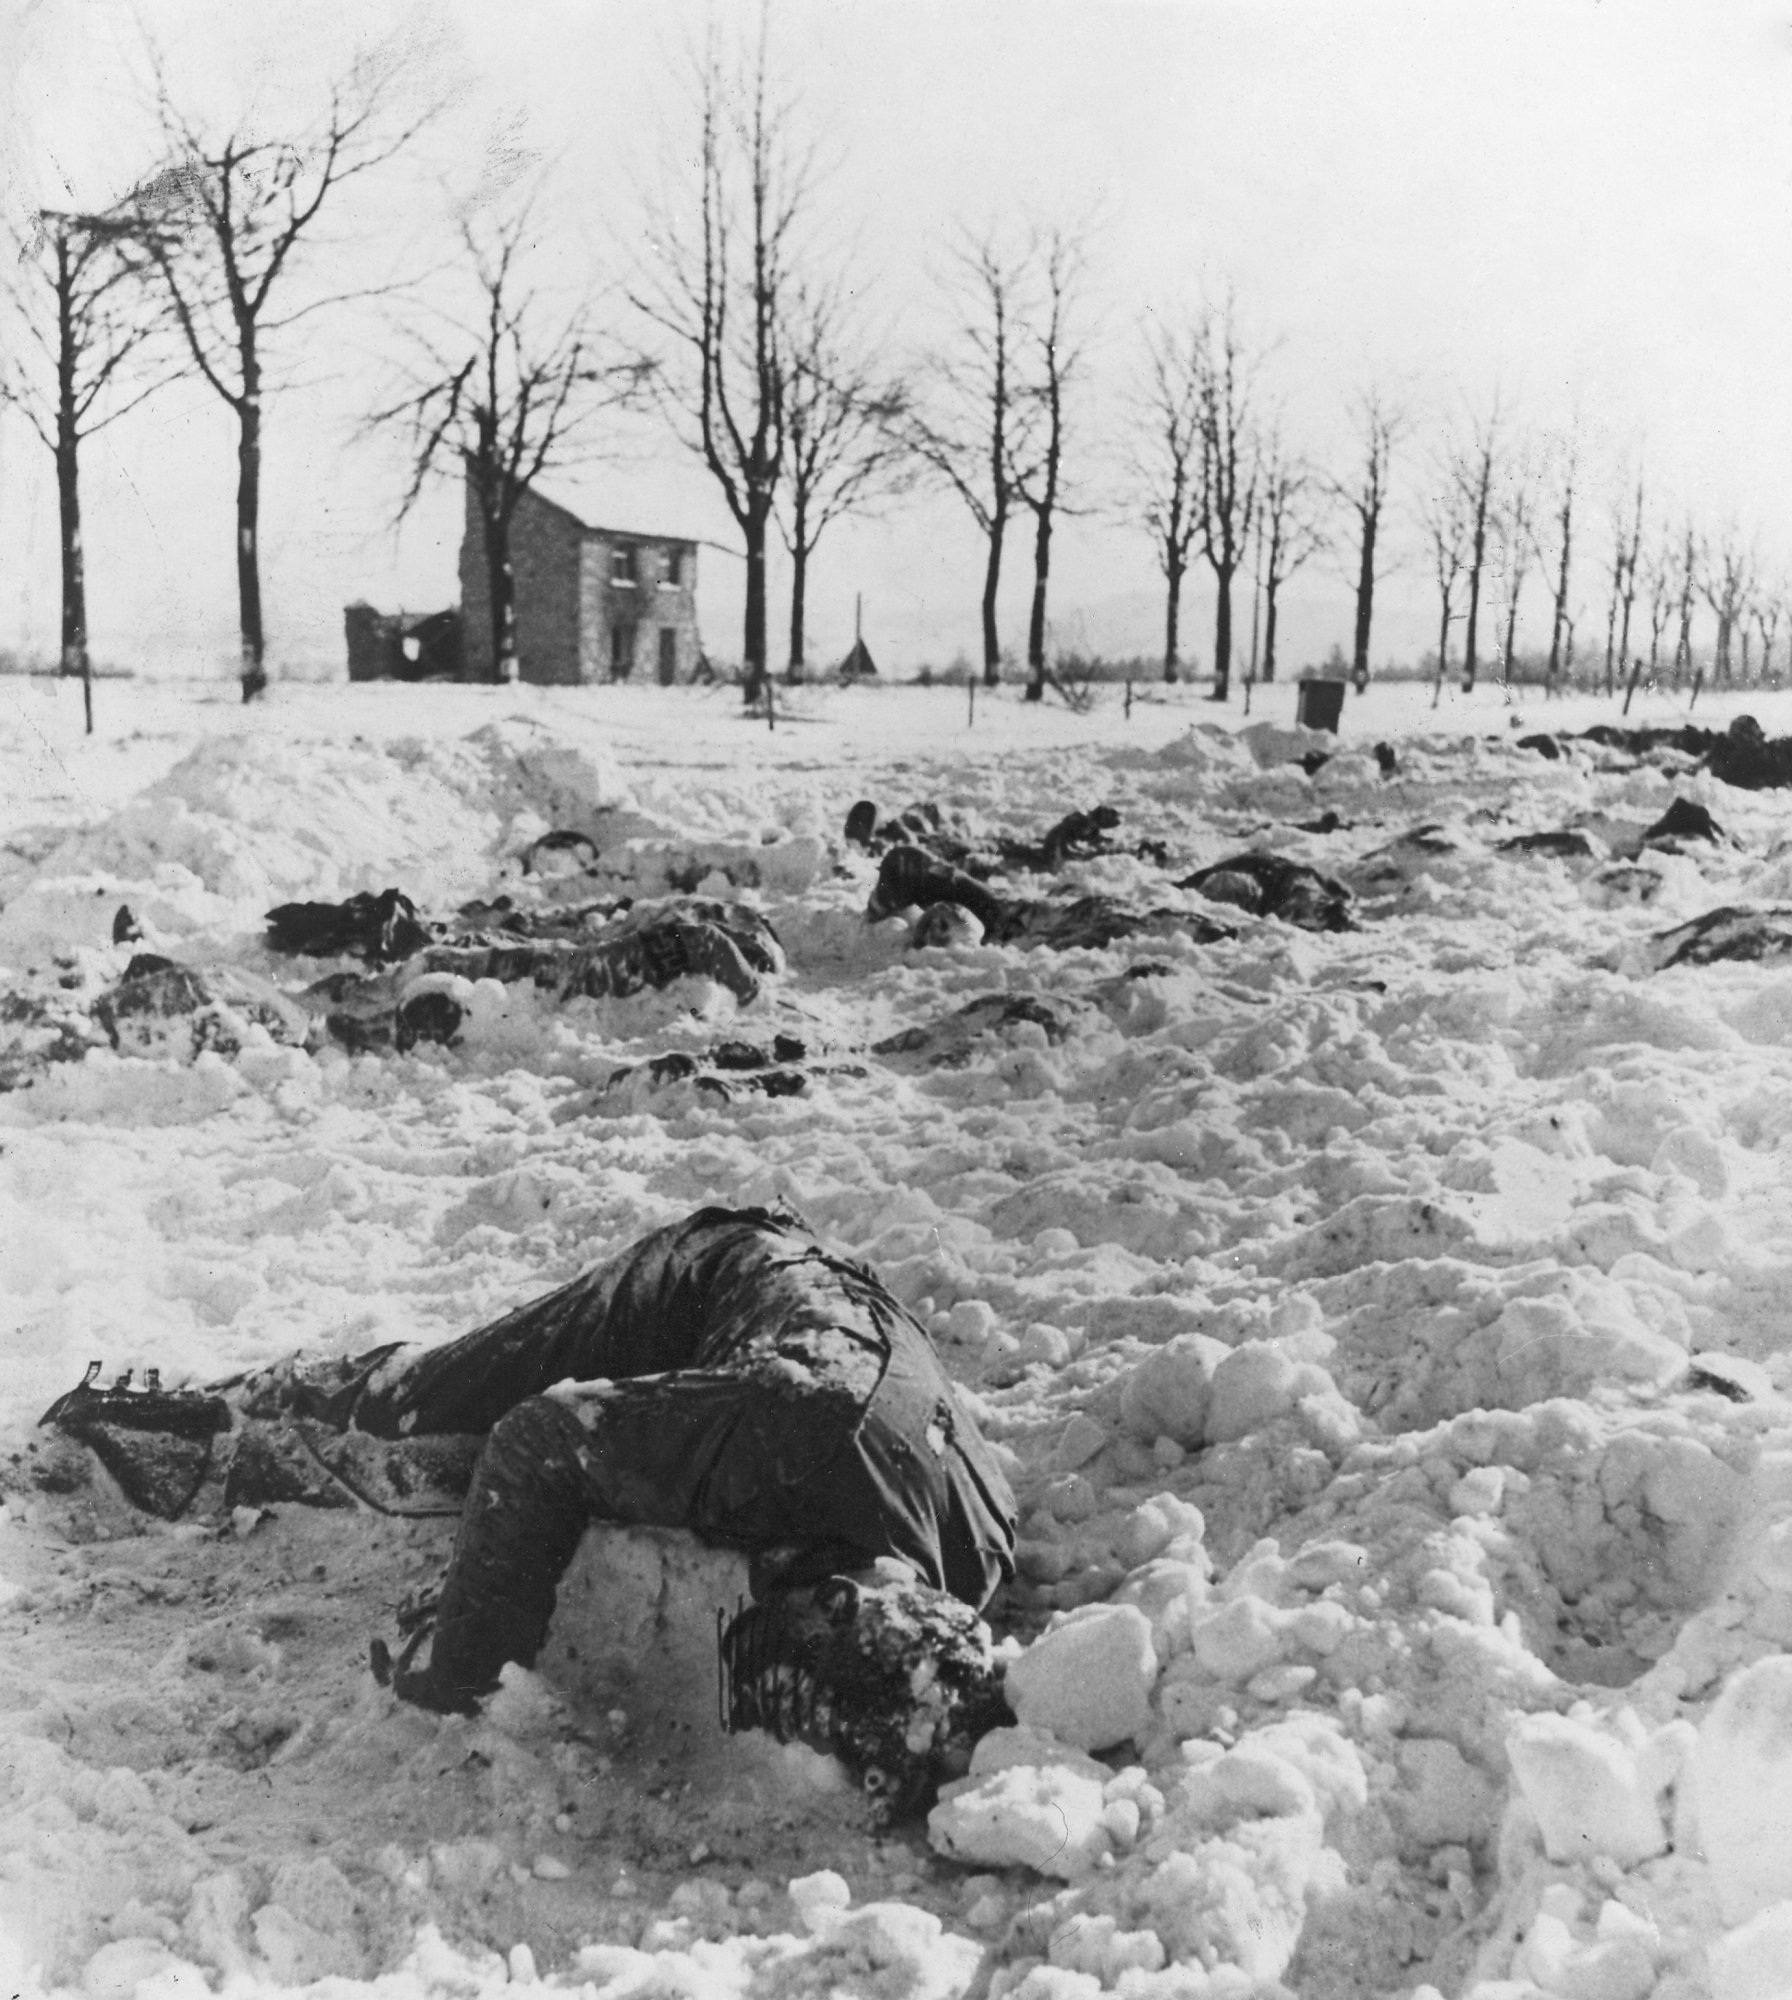 Bodies_of_U.S._officers_and_soldiers_slained_by_the_Nazis_after_capture_near_Malmedy,_Belgium....jpg